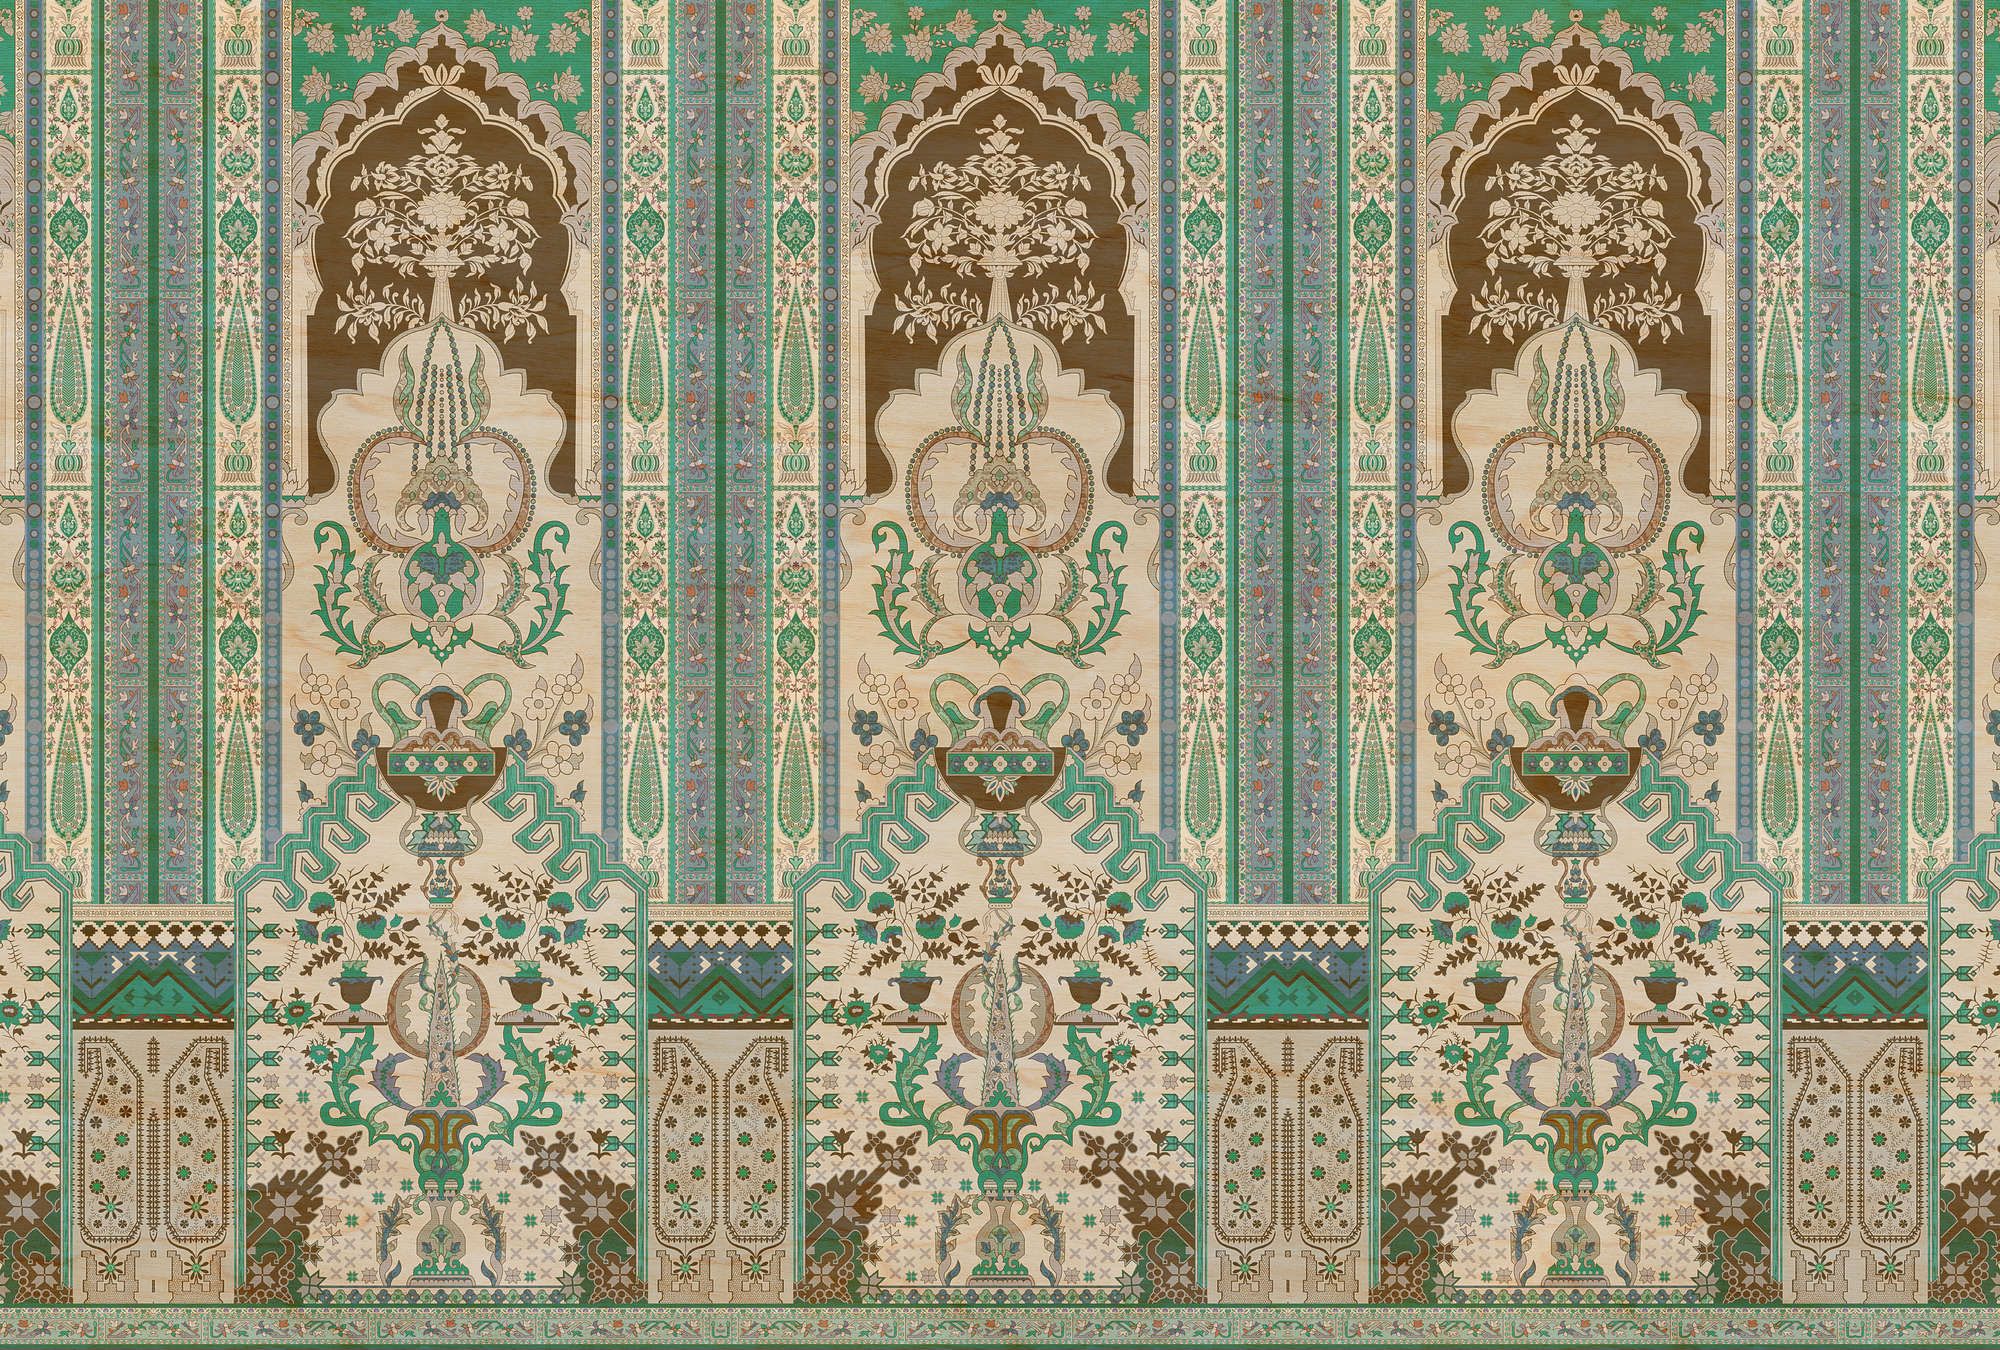             Photo wallpaper »tara« - Ornamental panelling with plywood structure - Green, Beige | Matt, Smooth non-woven
        